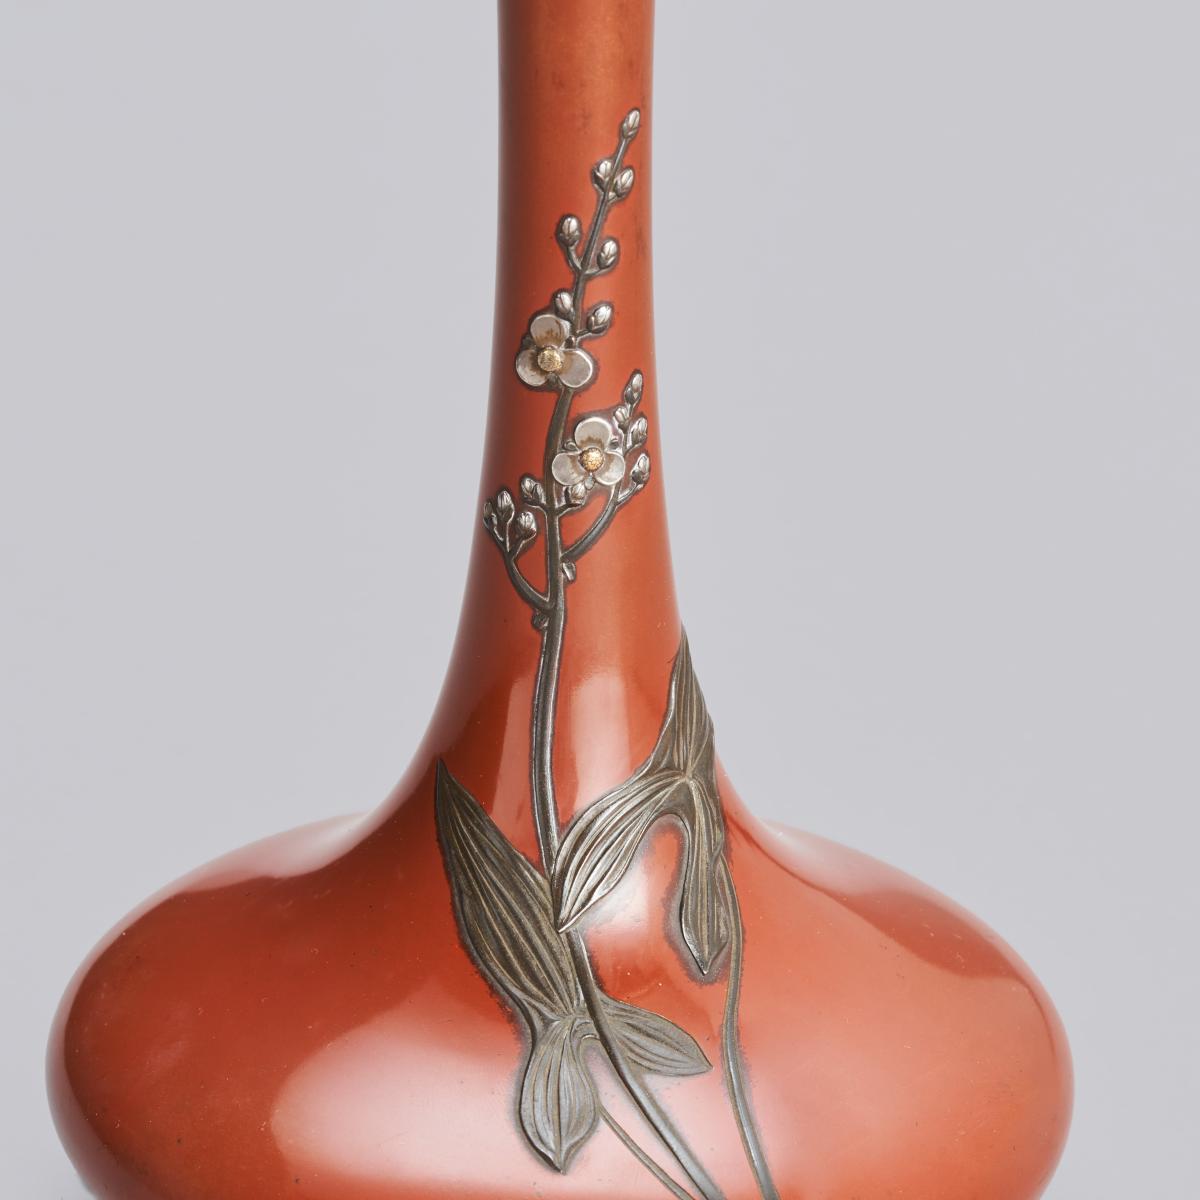 Japanese bronze and multi-metal vase inlaid with cherry blossoms and taro leaves, signed in a seal Jomi Eisuke II 